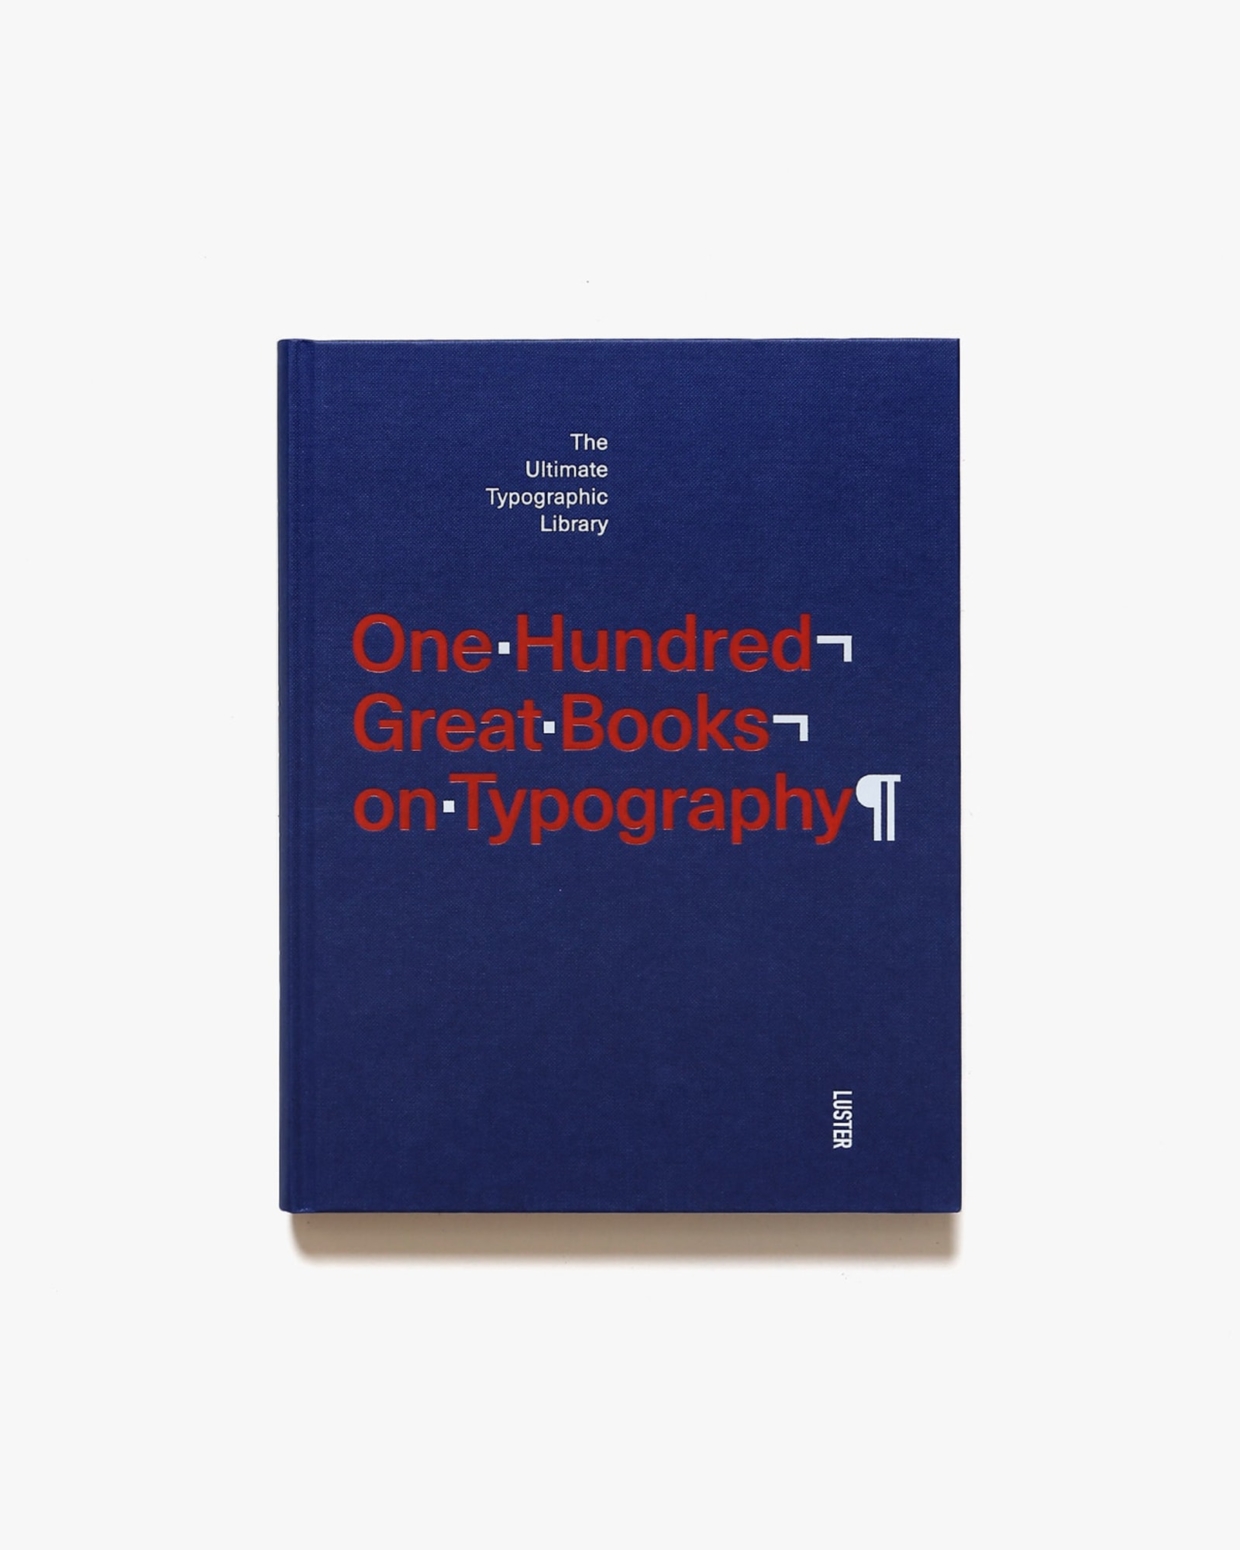 One Hundred Great Books on Typography: The Ultimate Typographic Library | 著者名